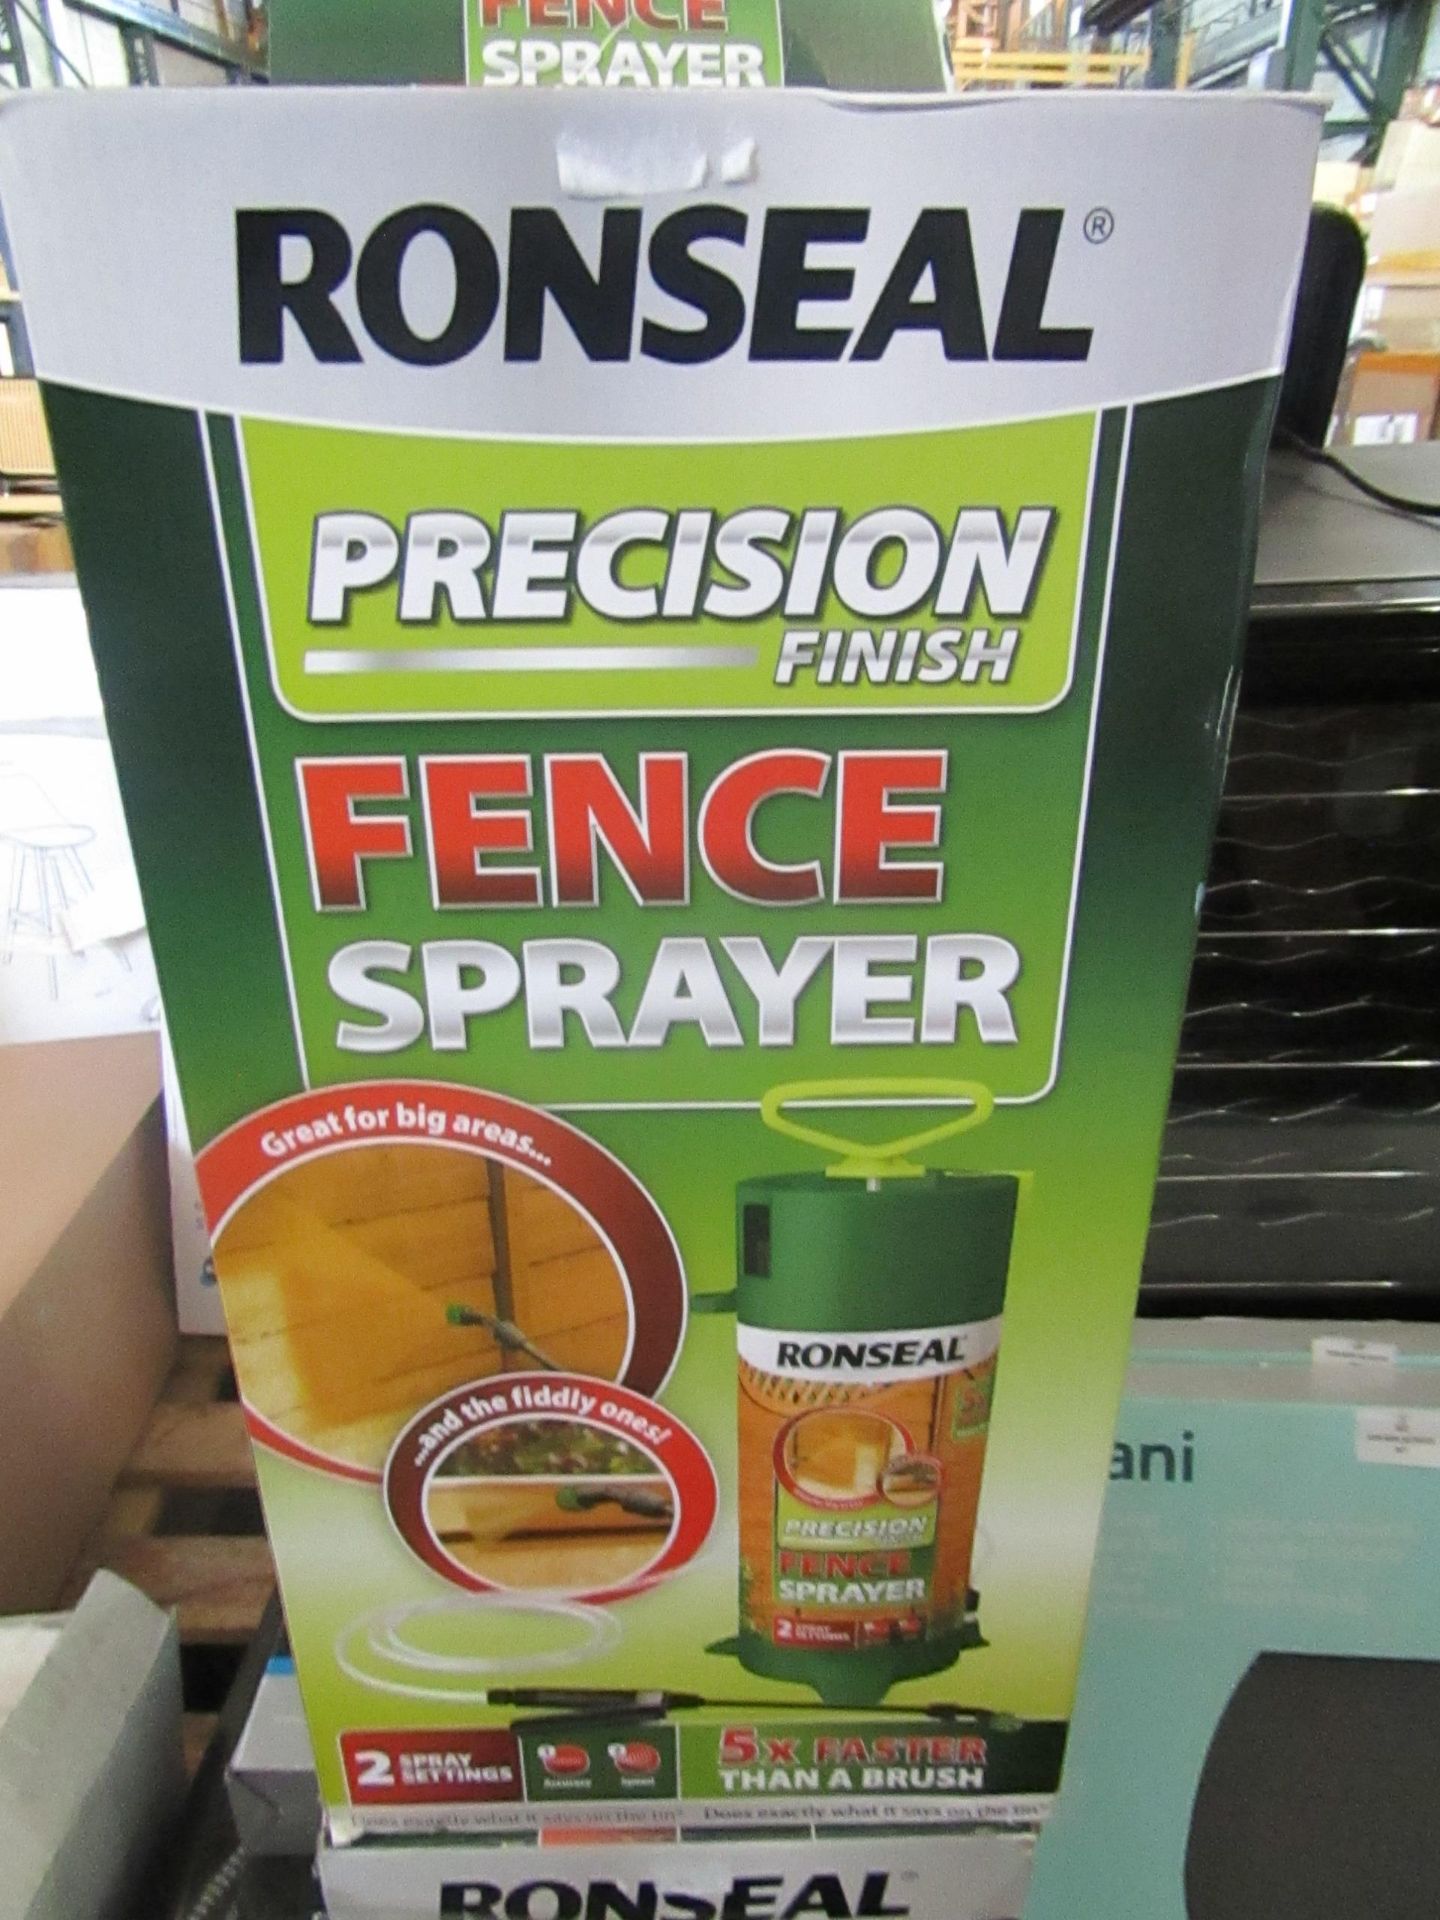 6x Ronseal - Precision Finish Fence Sprayer - Used Condition & Boxed.